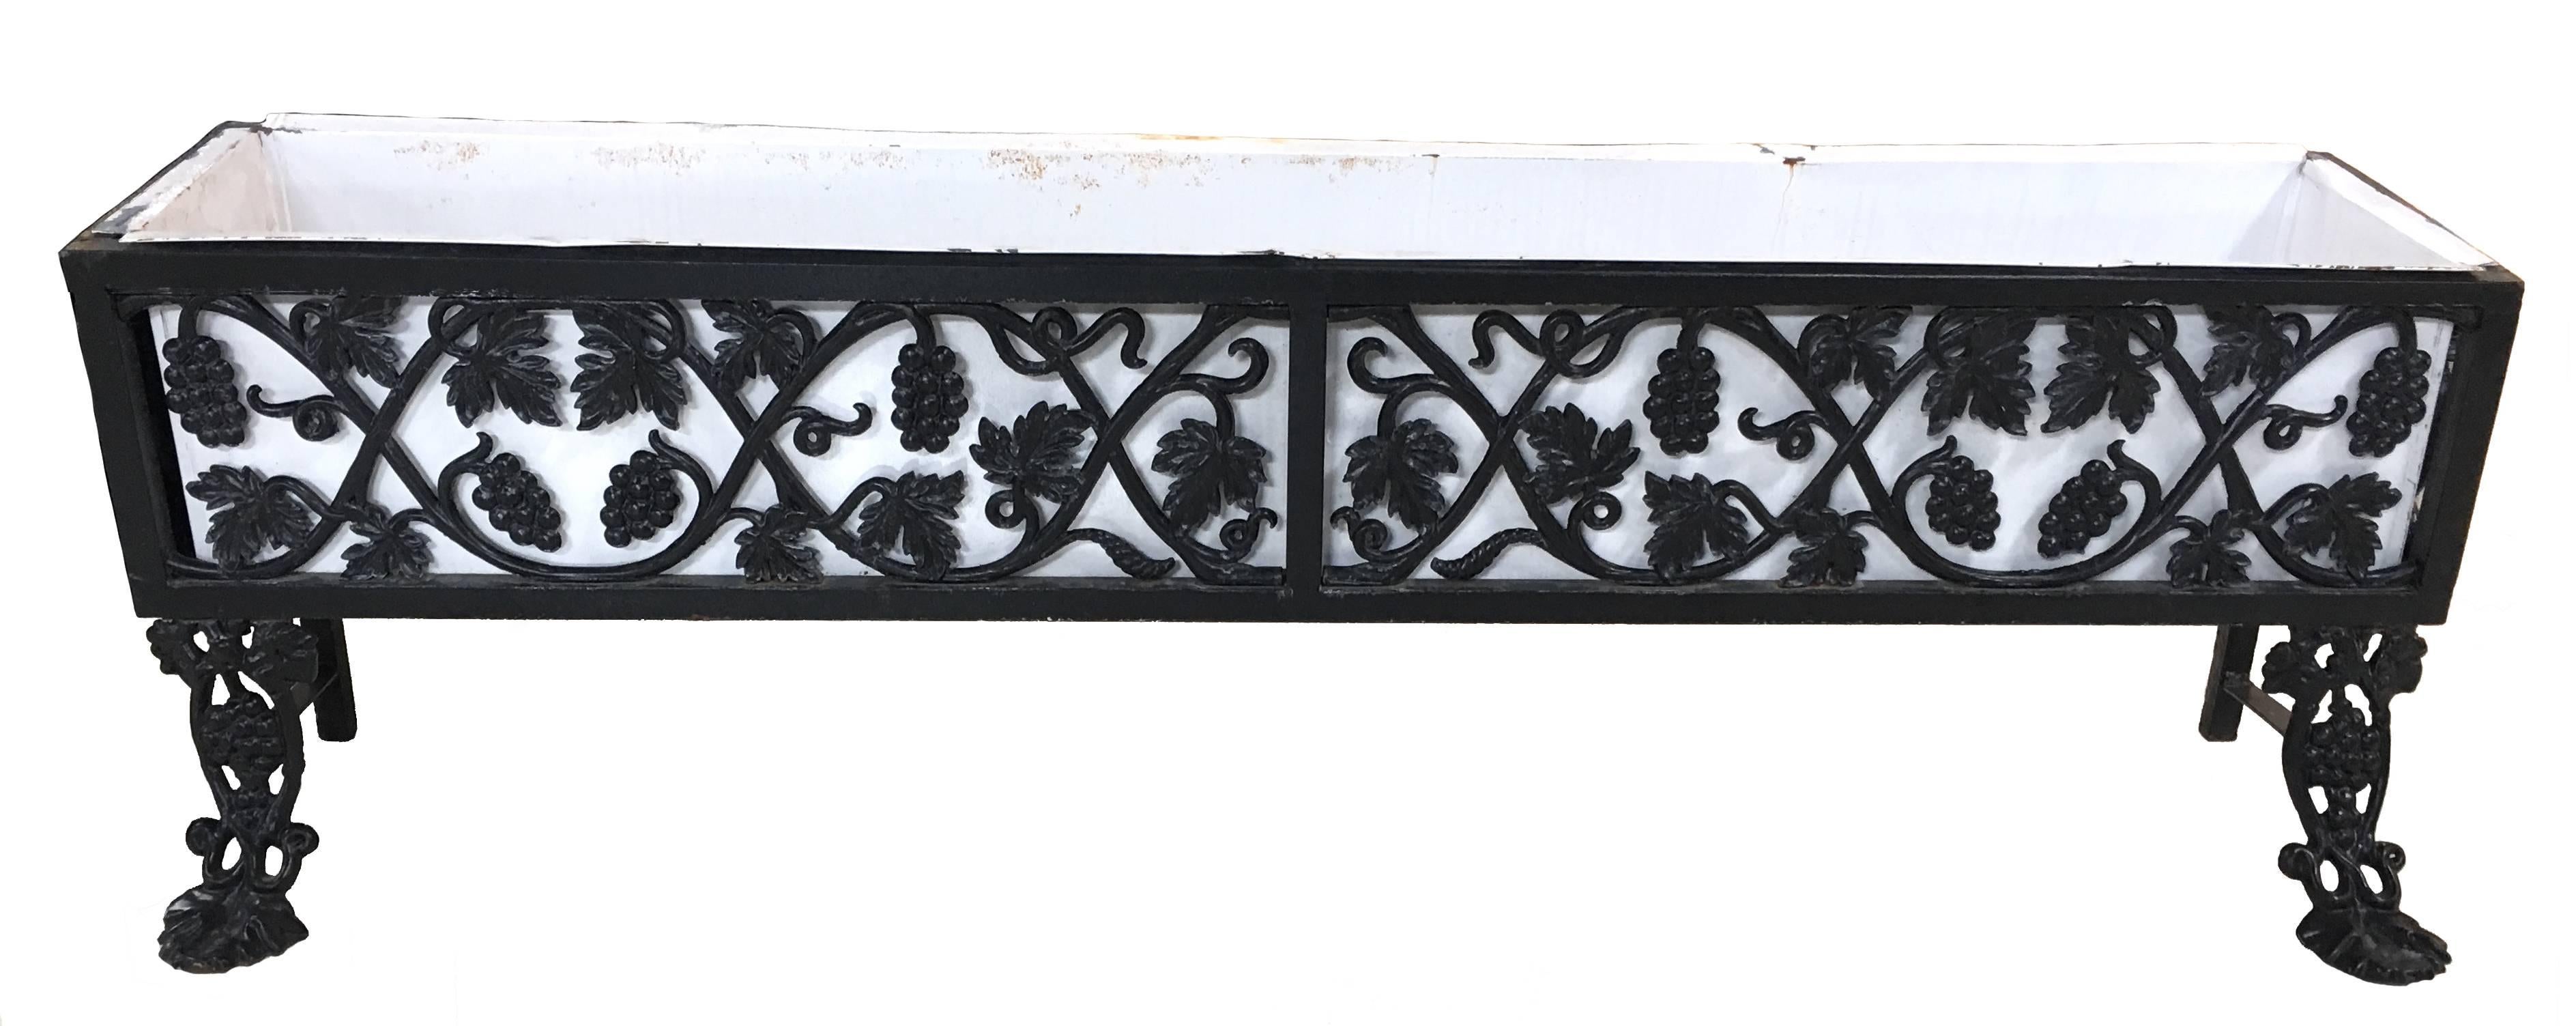 Pair of cast iron box planters with black ivy, grape and leaf pattern. From a waterfront Greenwich, Connecticut estate. Front curved front feet. Removable contemporary powder-coated white metal liners with drainage holes. The liners have light